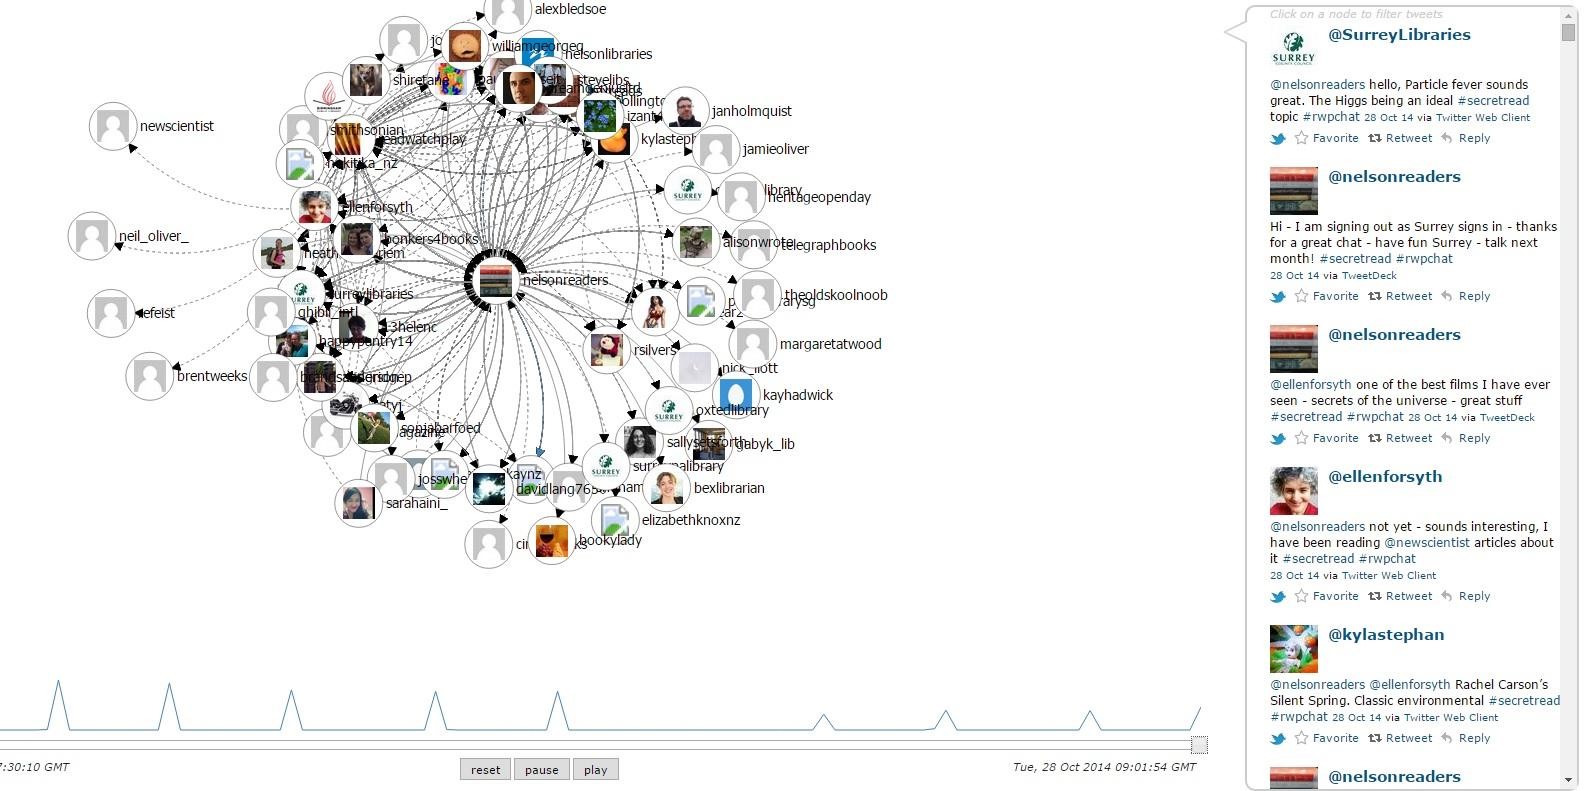 Figure 2: This shows a summary of the conversations that Nelson Library, using its twitter account @nelsonreaders, has been participating in. You can read your way through every tweet it has contributed using the #RWPchat tag, and you can also read the conversations it has participated in.